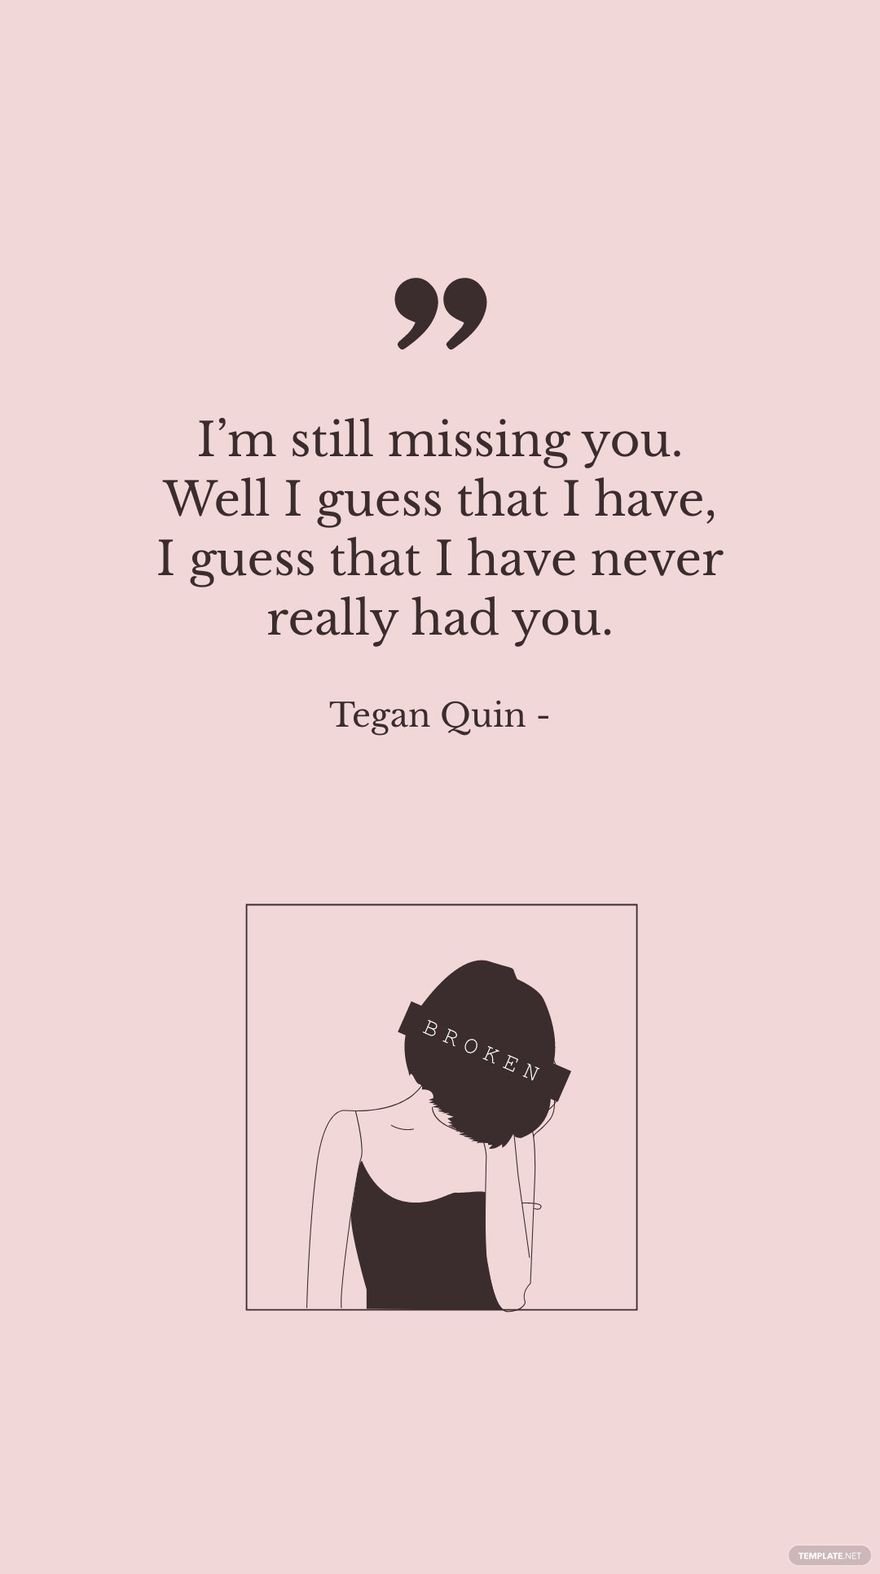 Tegan Quin - I’m still missing you. Well I guess that I have, I guess that I have never really had you.